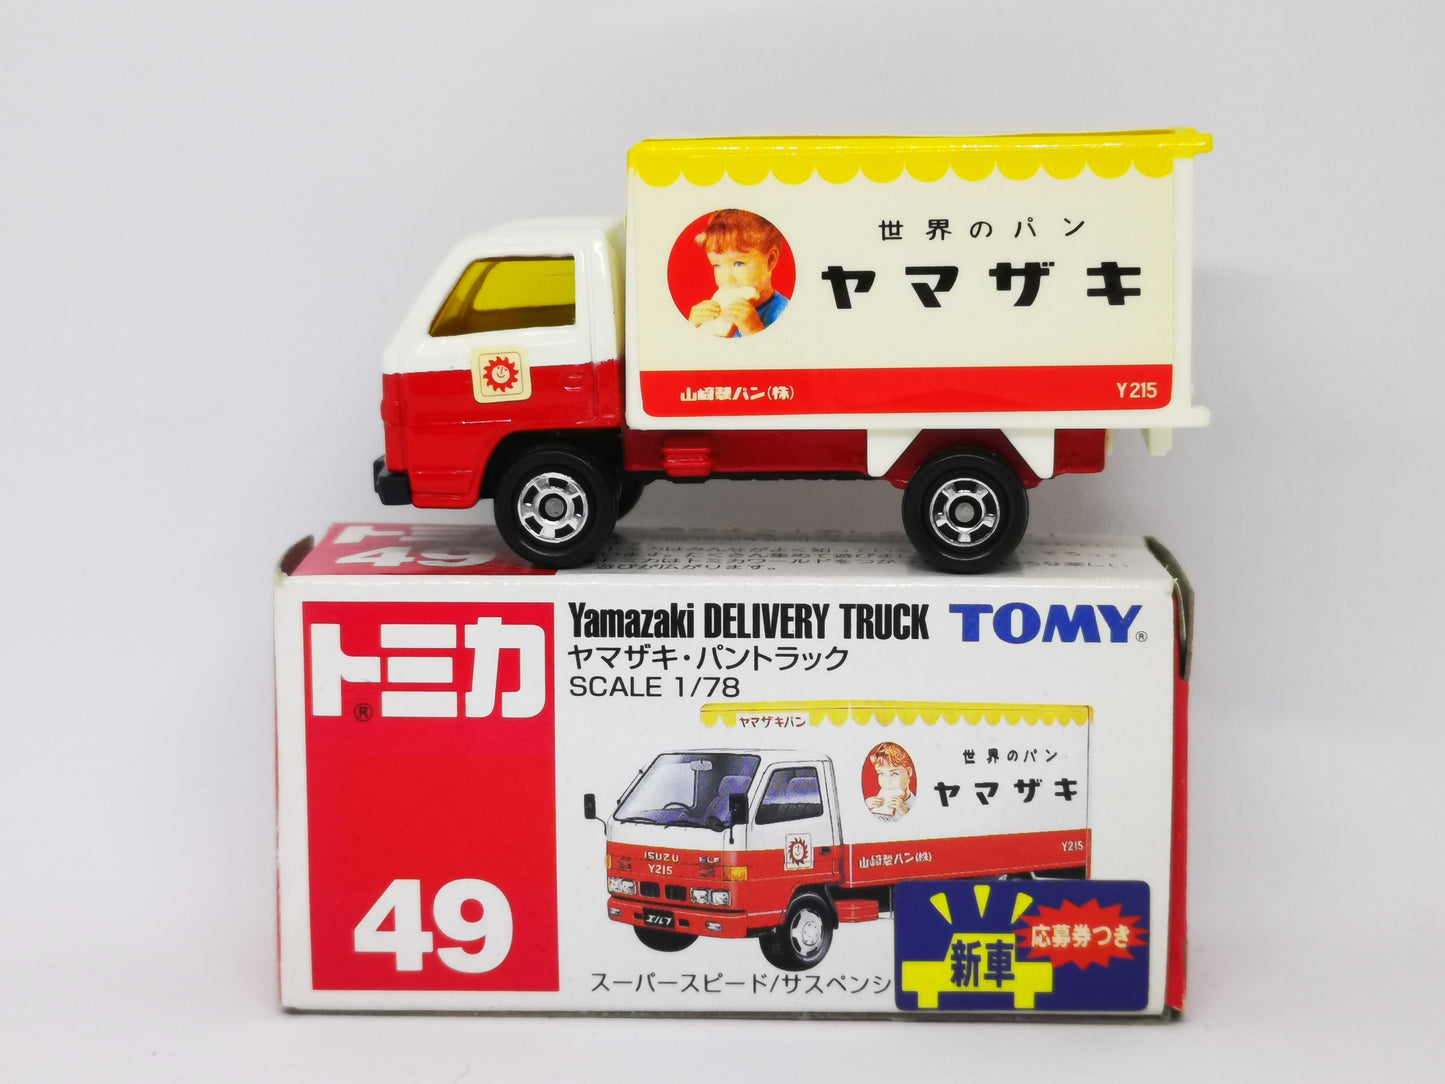 Tomica No.49 Yamaziki Delivery Truck 1:78 scale